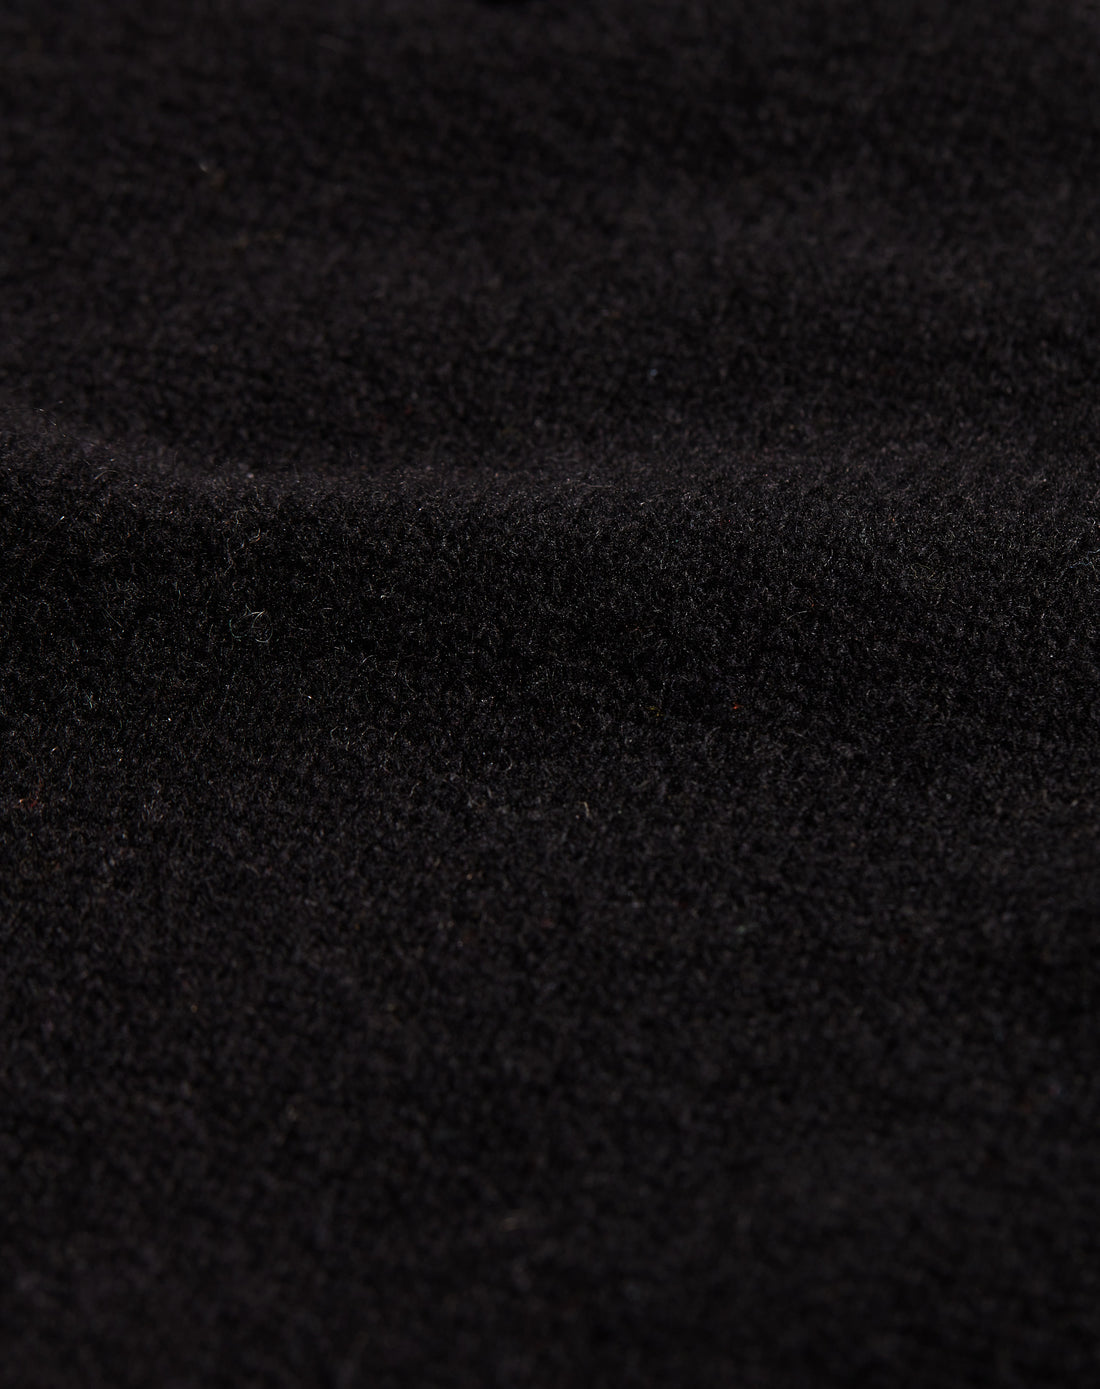 Women’s Black Recycled Cashmere Polo